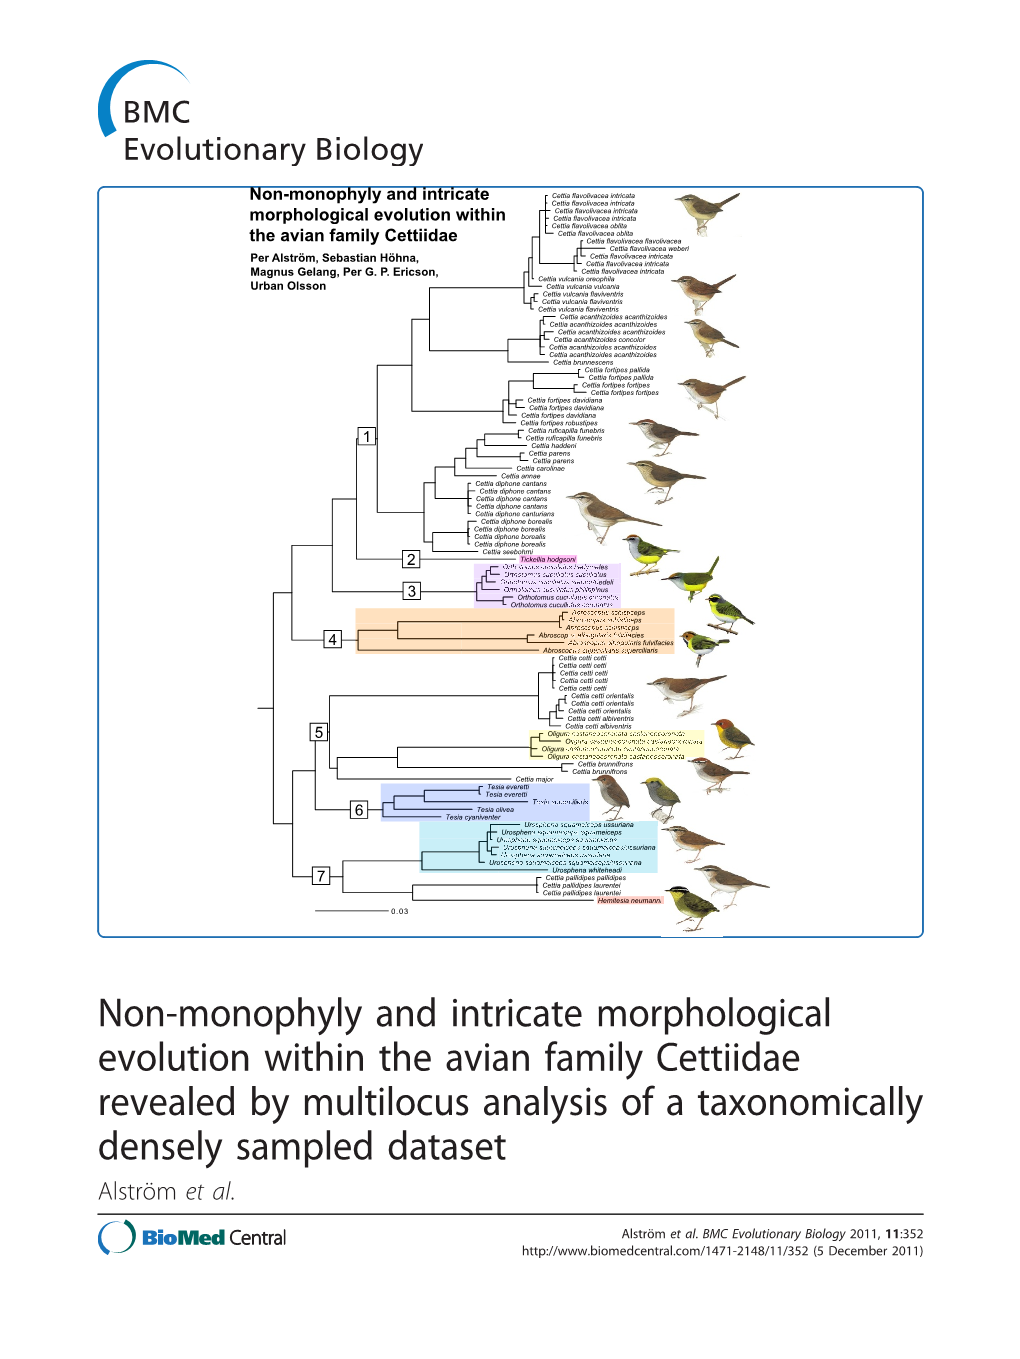 Non-Monophyly and Intricate Morphological Evolution Within The